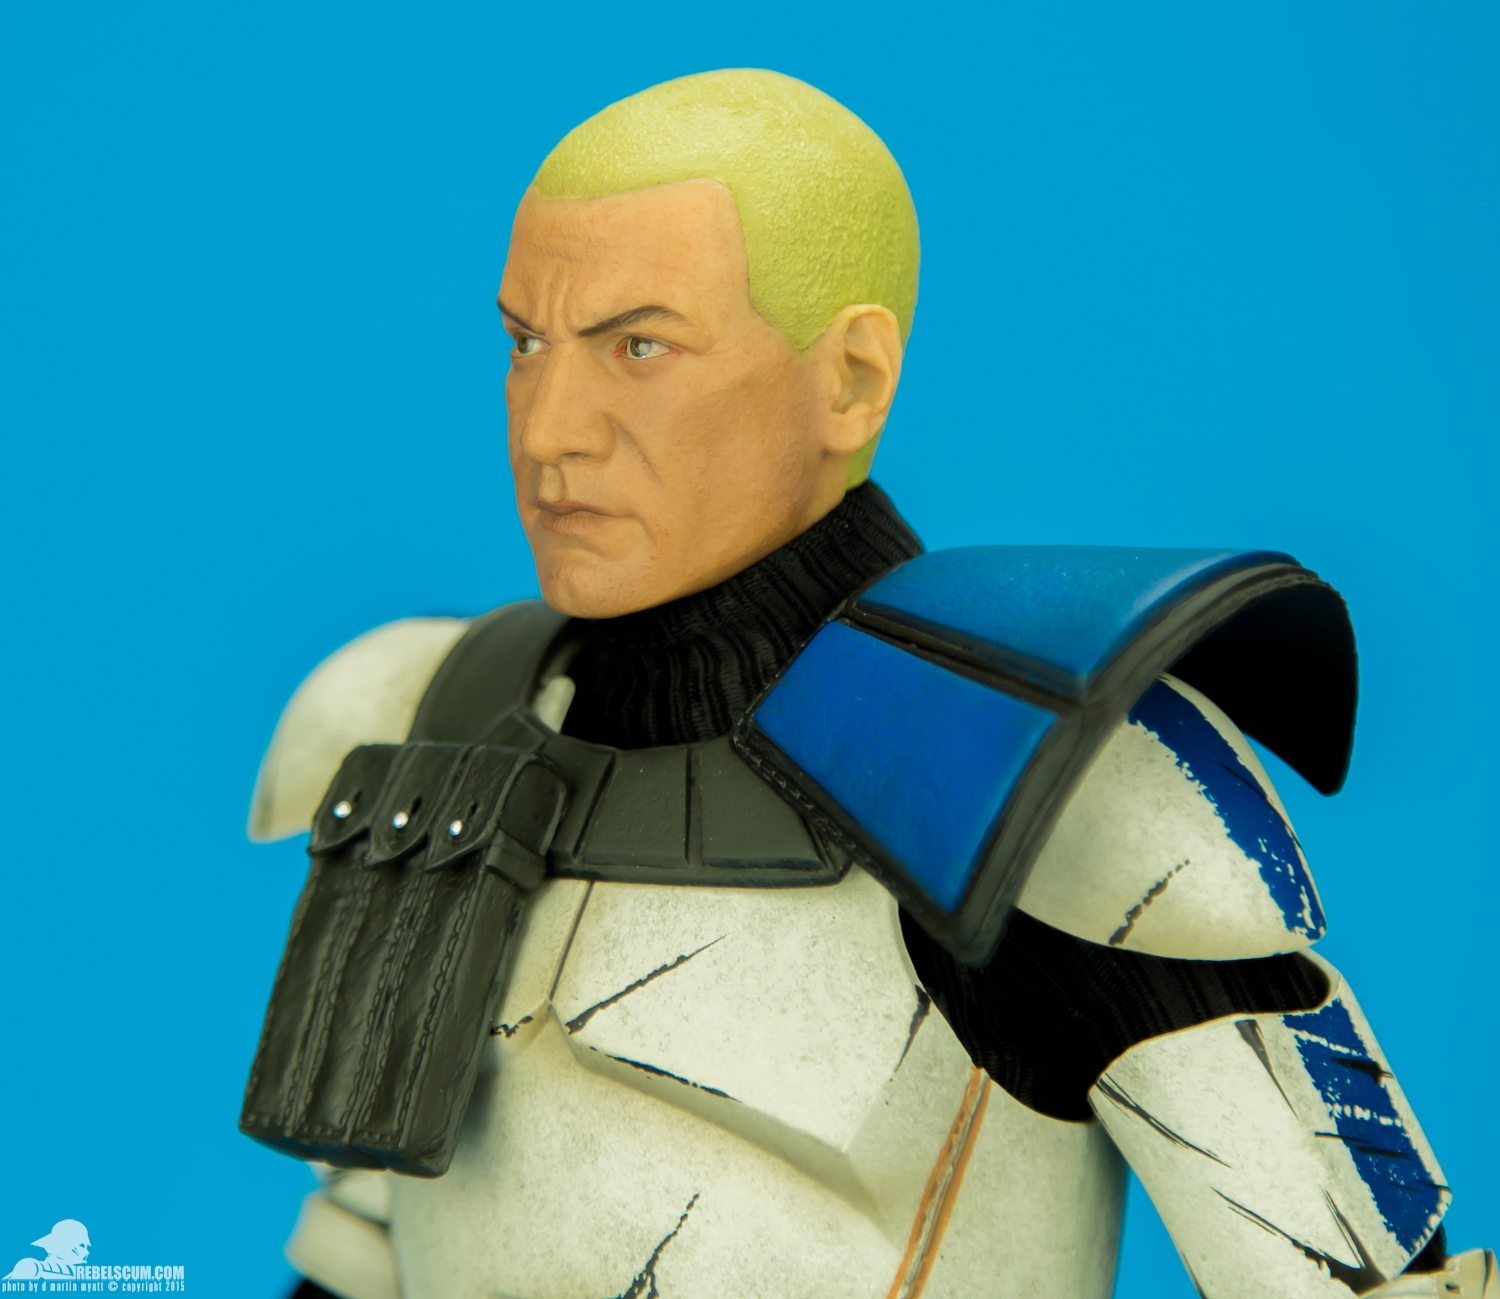 Captain-Rex-Phase-II-Sixth-Scale-Figure-Sideshow-Collectibles-015.jpg